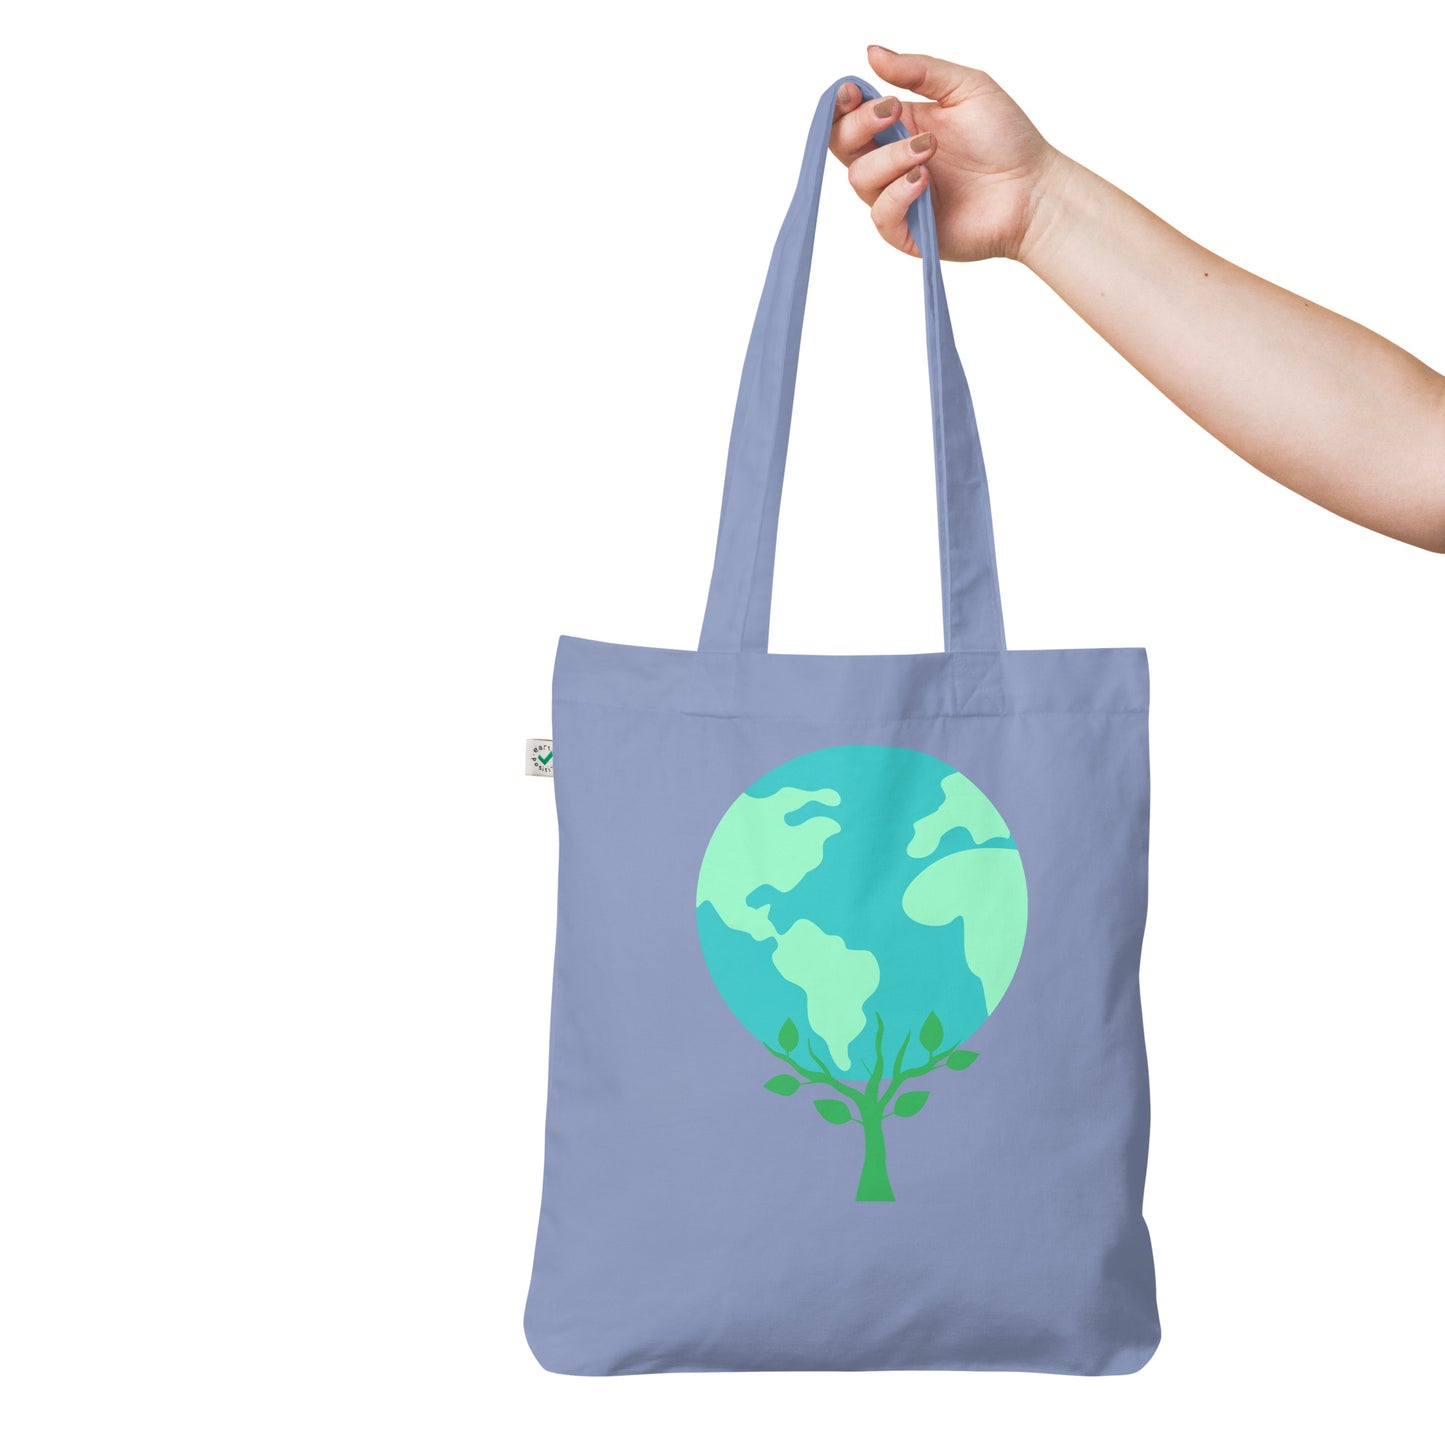 Green planet Organic Tote Bag 🌱(Pink or Blue)